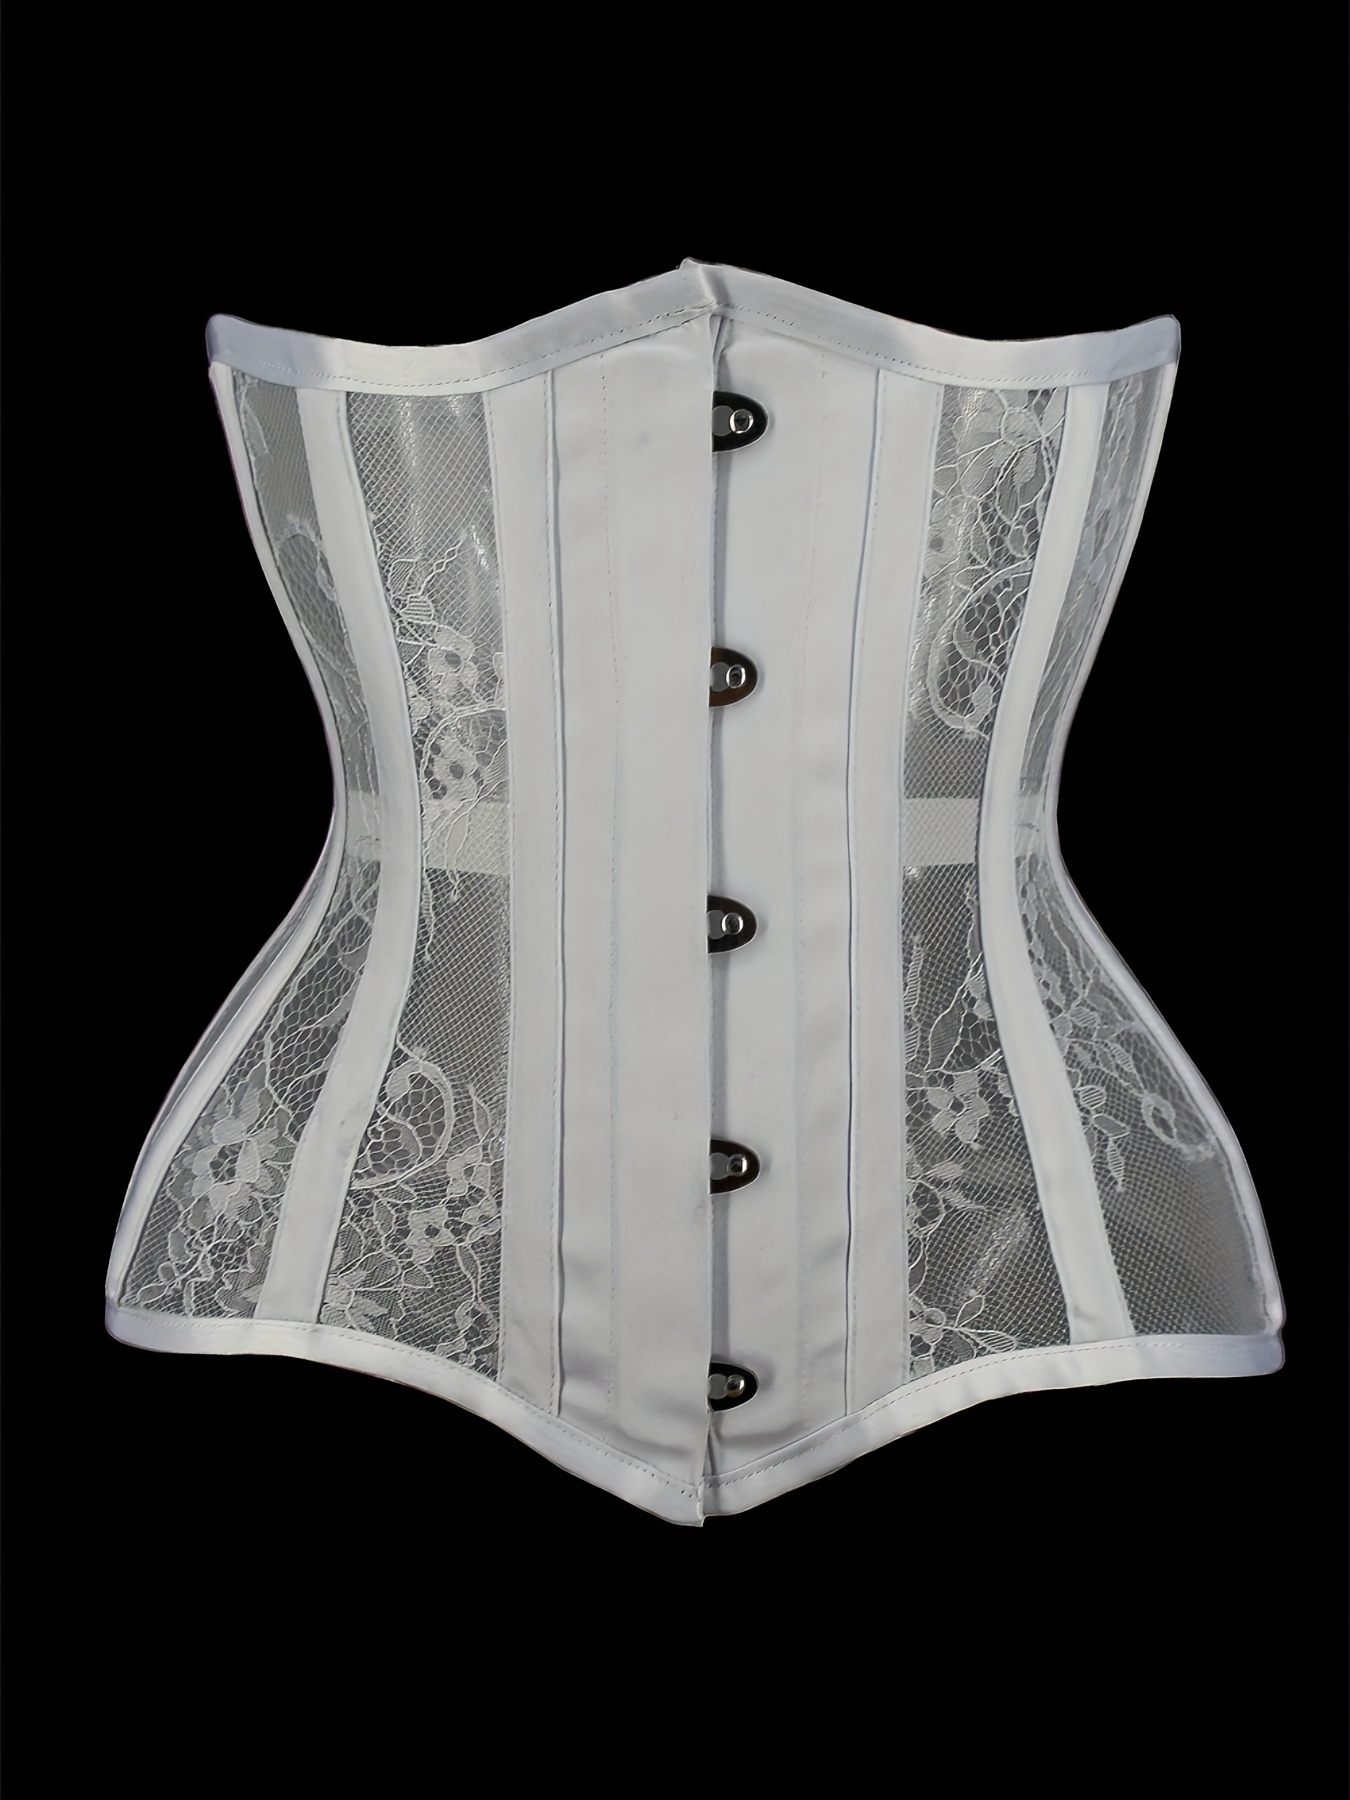 Corsets For Women,Women'S Bustiers Vintage White Hollow Lace